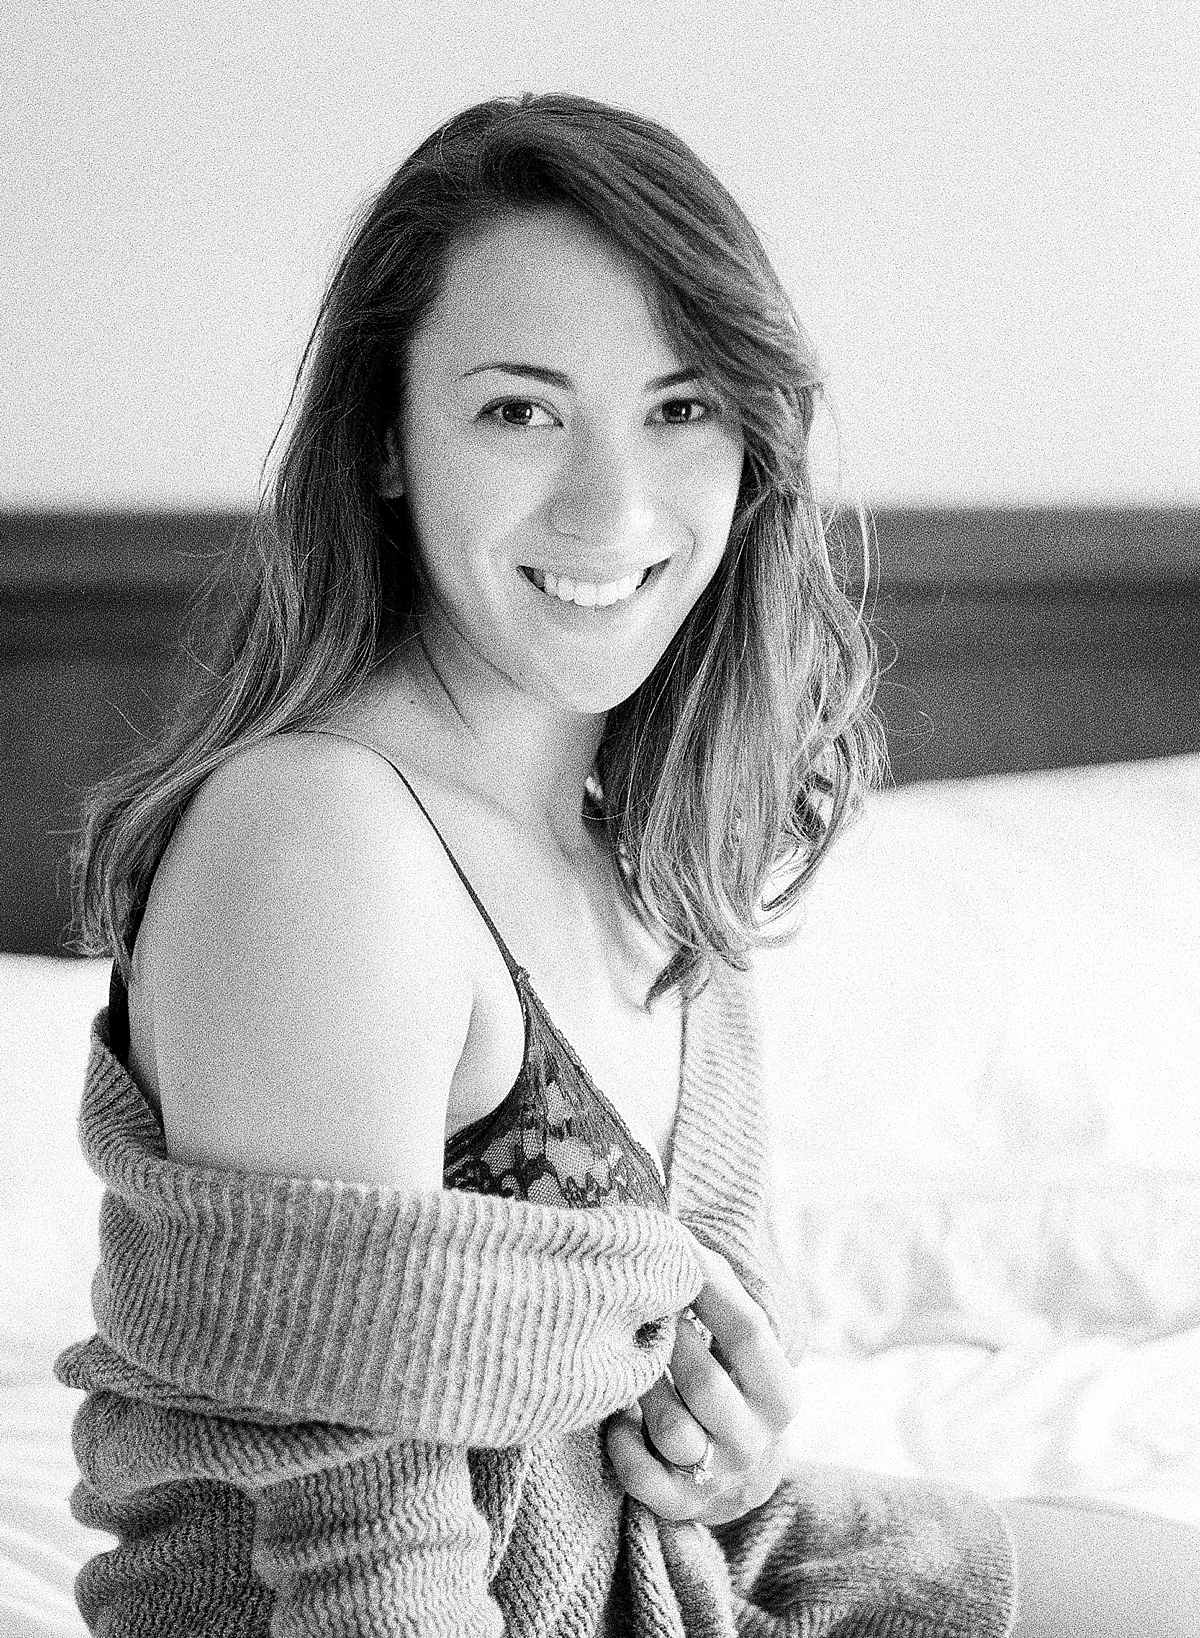 Alicia Lacey, a Washington, DC wedding photographer, promotes self-confidence and natural beauty through black and white film photos for The Portrait Project.